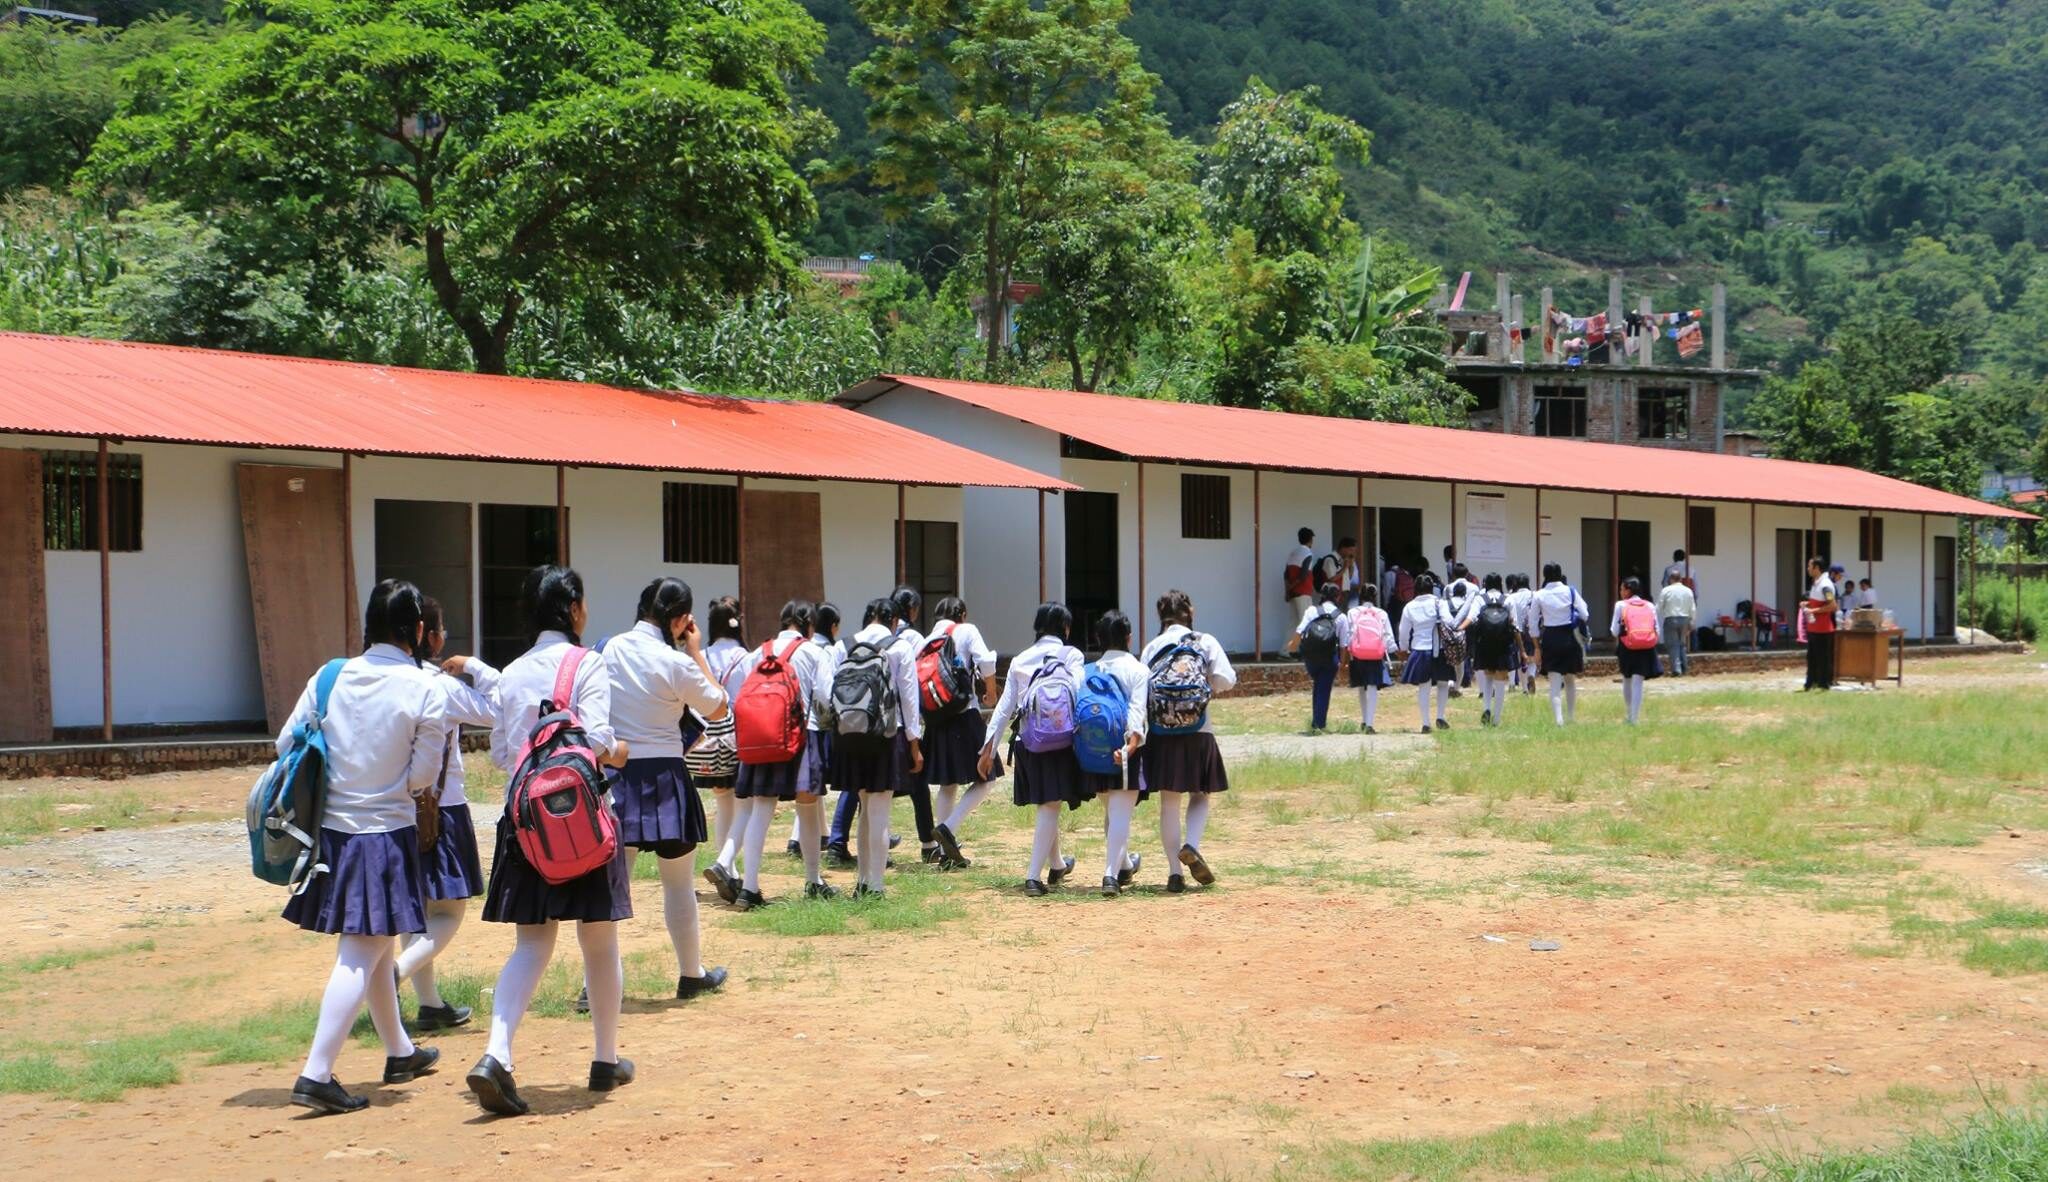 In a lush green landscape, rows of uniformed school children walk towards clean, simple classrooms with white walls and red roofs.